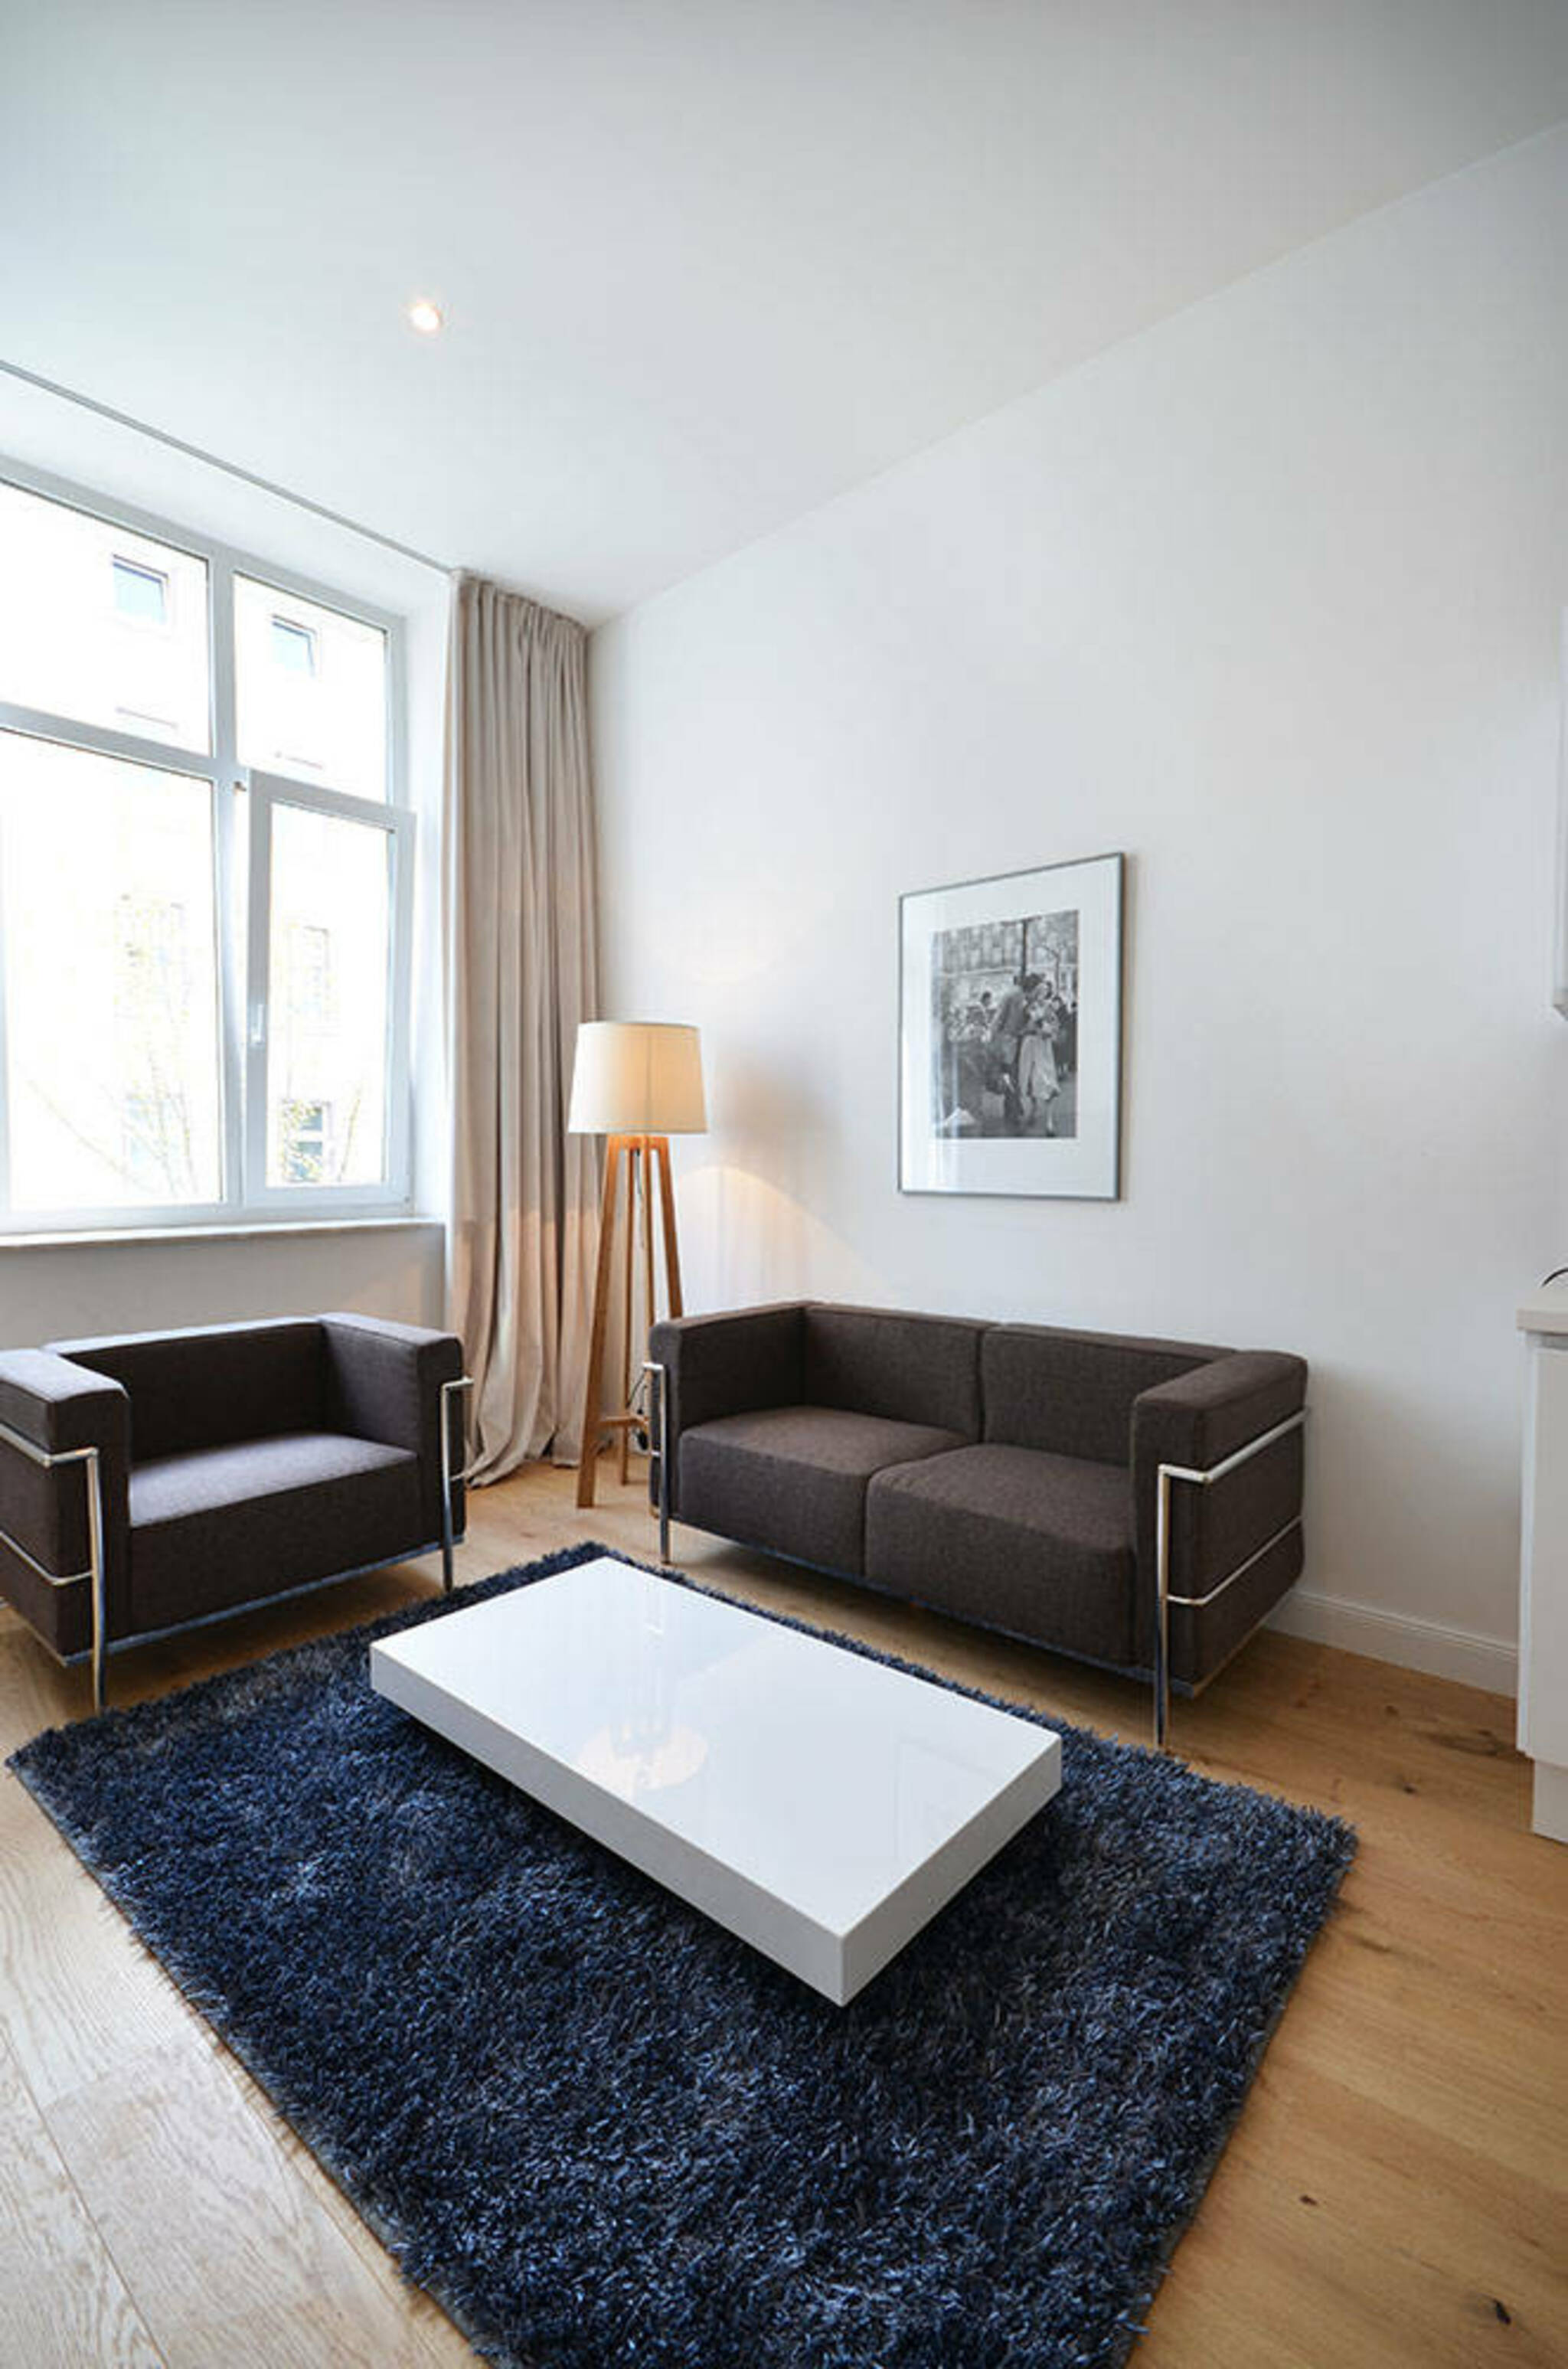 Property Image 2 - Sophisticatedly Styled Aparttment in Frankfurt near White Tower